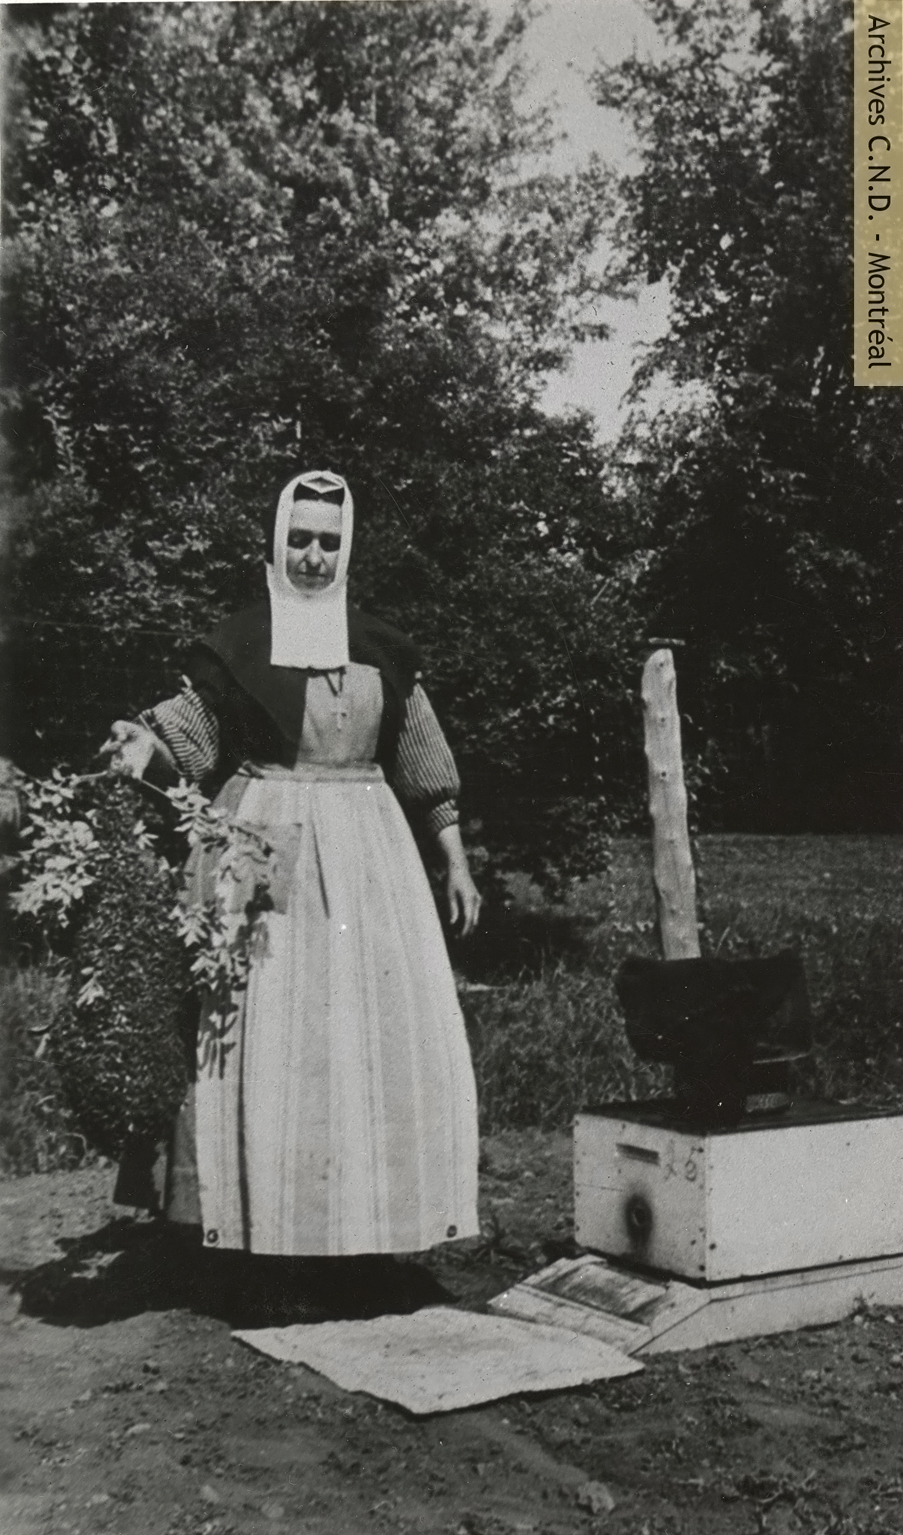 Sister Sainte-Clémence-de-Rome (Louise Dupuis) with a swarm of bees in her lily garden